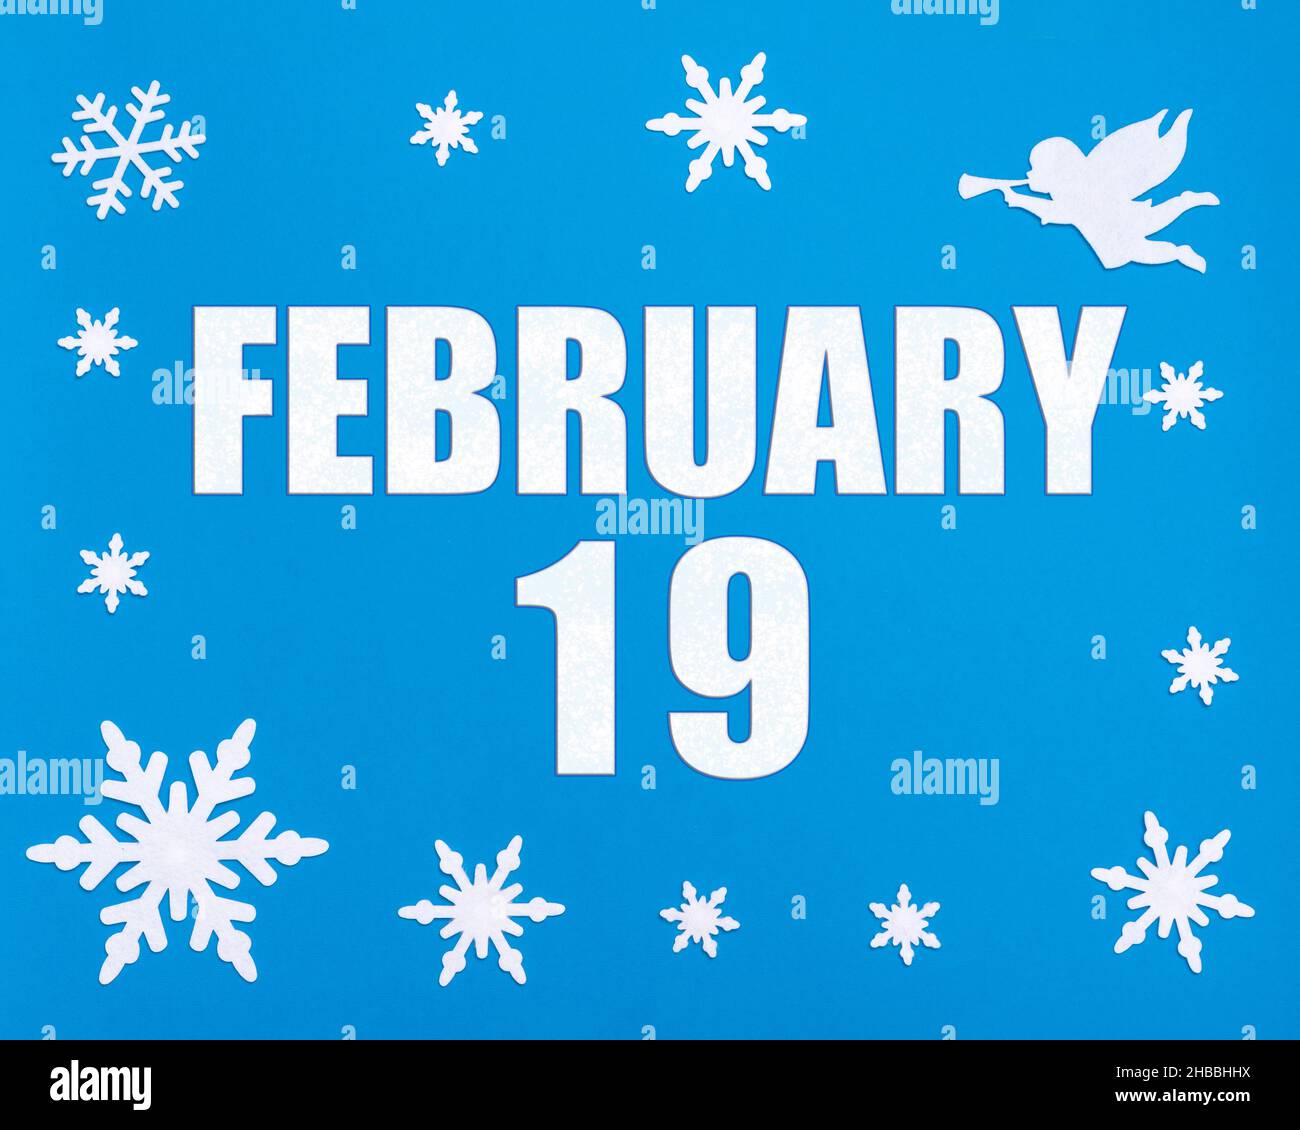 February 19th. Winter blue background with snowflakes, angel and a calendar date. Day 19 of month. Winter month, day of the year concept. Stock Photo